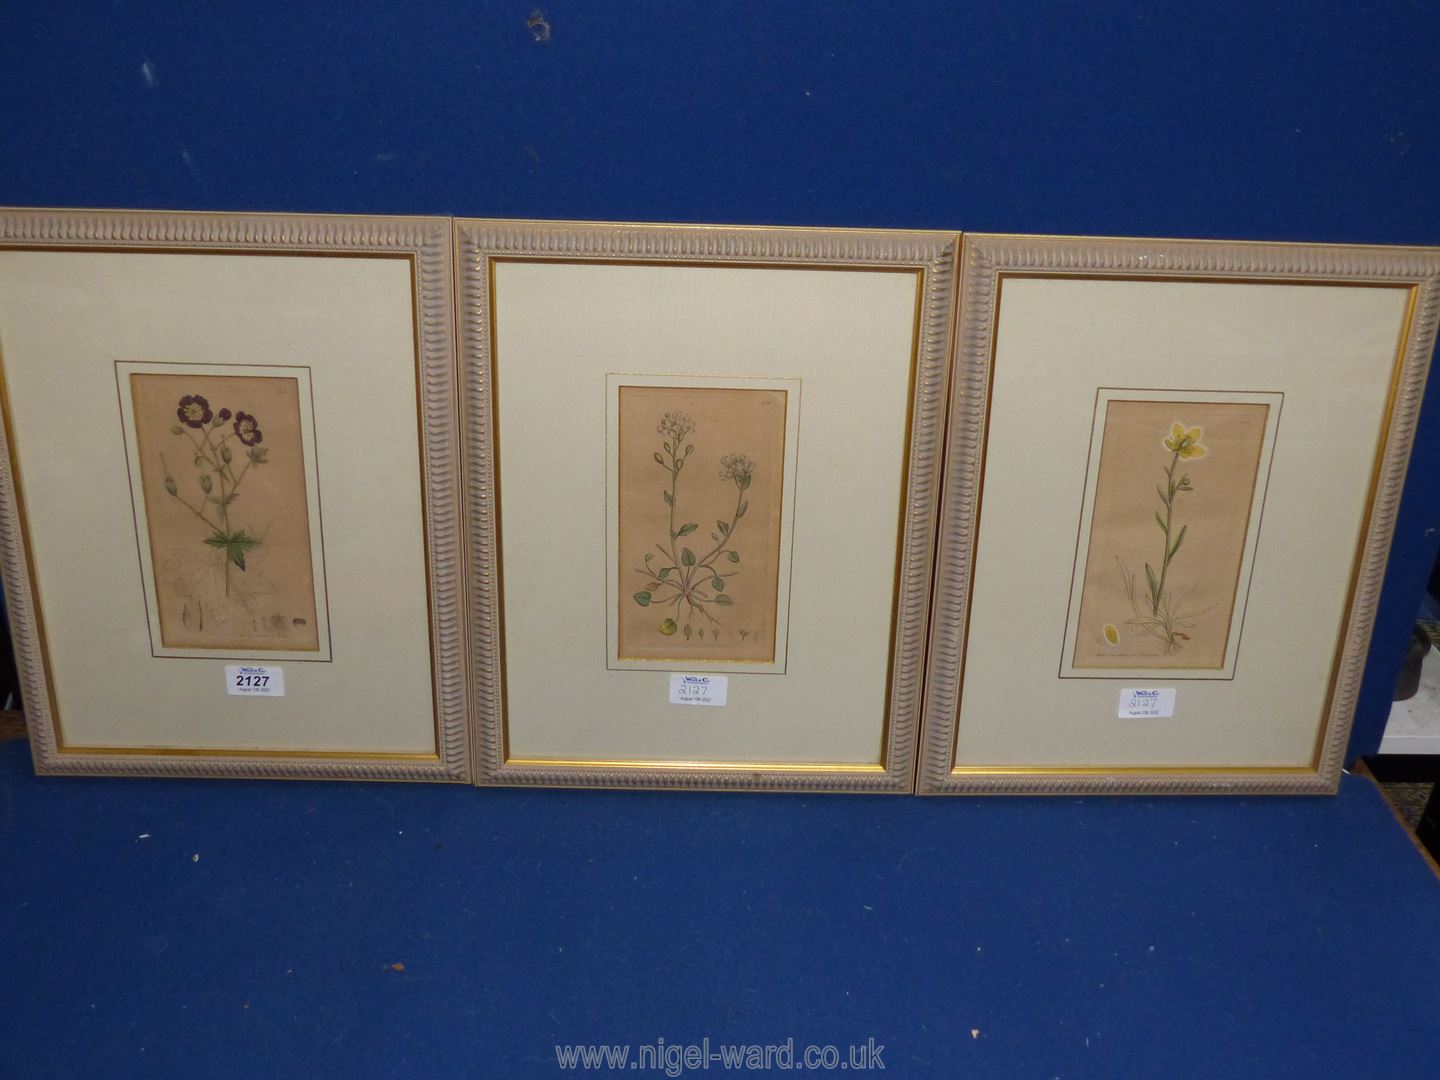 Three framed Botanical prints dated 1795, 1799 and 1802.